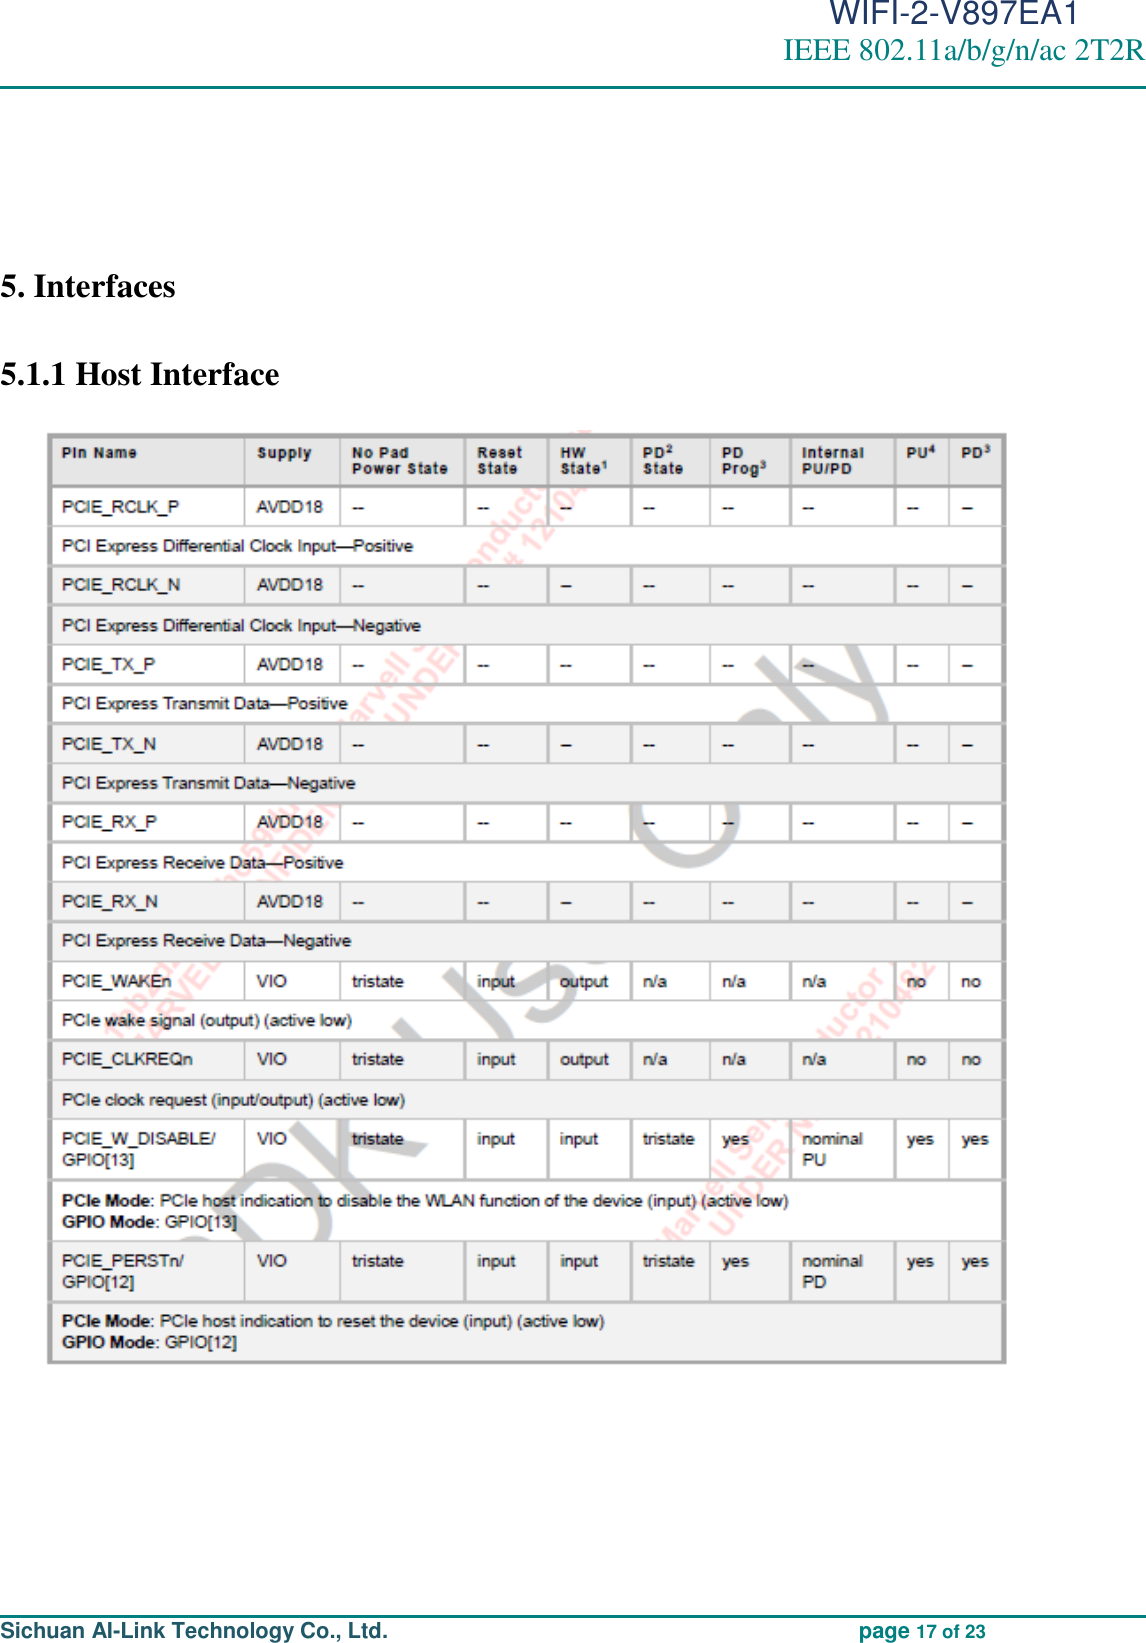                                                                                          WIFI-2-V897EA1 IEEE 802.11a/b/g/n/ac 2T2R                                                                                                                                                                                                                                                                                                                                                                                                                     Sichuan AI-Link Technology Co., Ltd.                                             page 17 of 23   5. Interfaces 5.1.1 Host Interface        